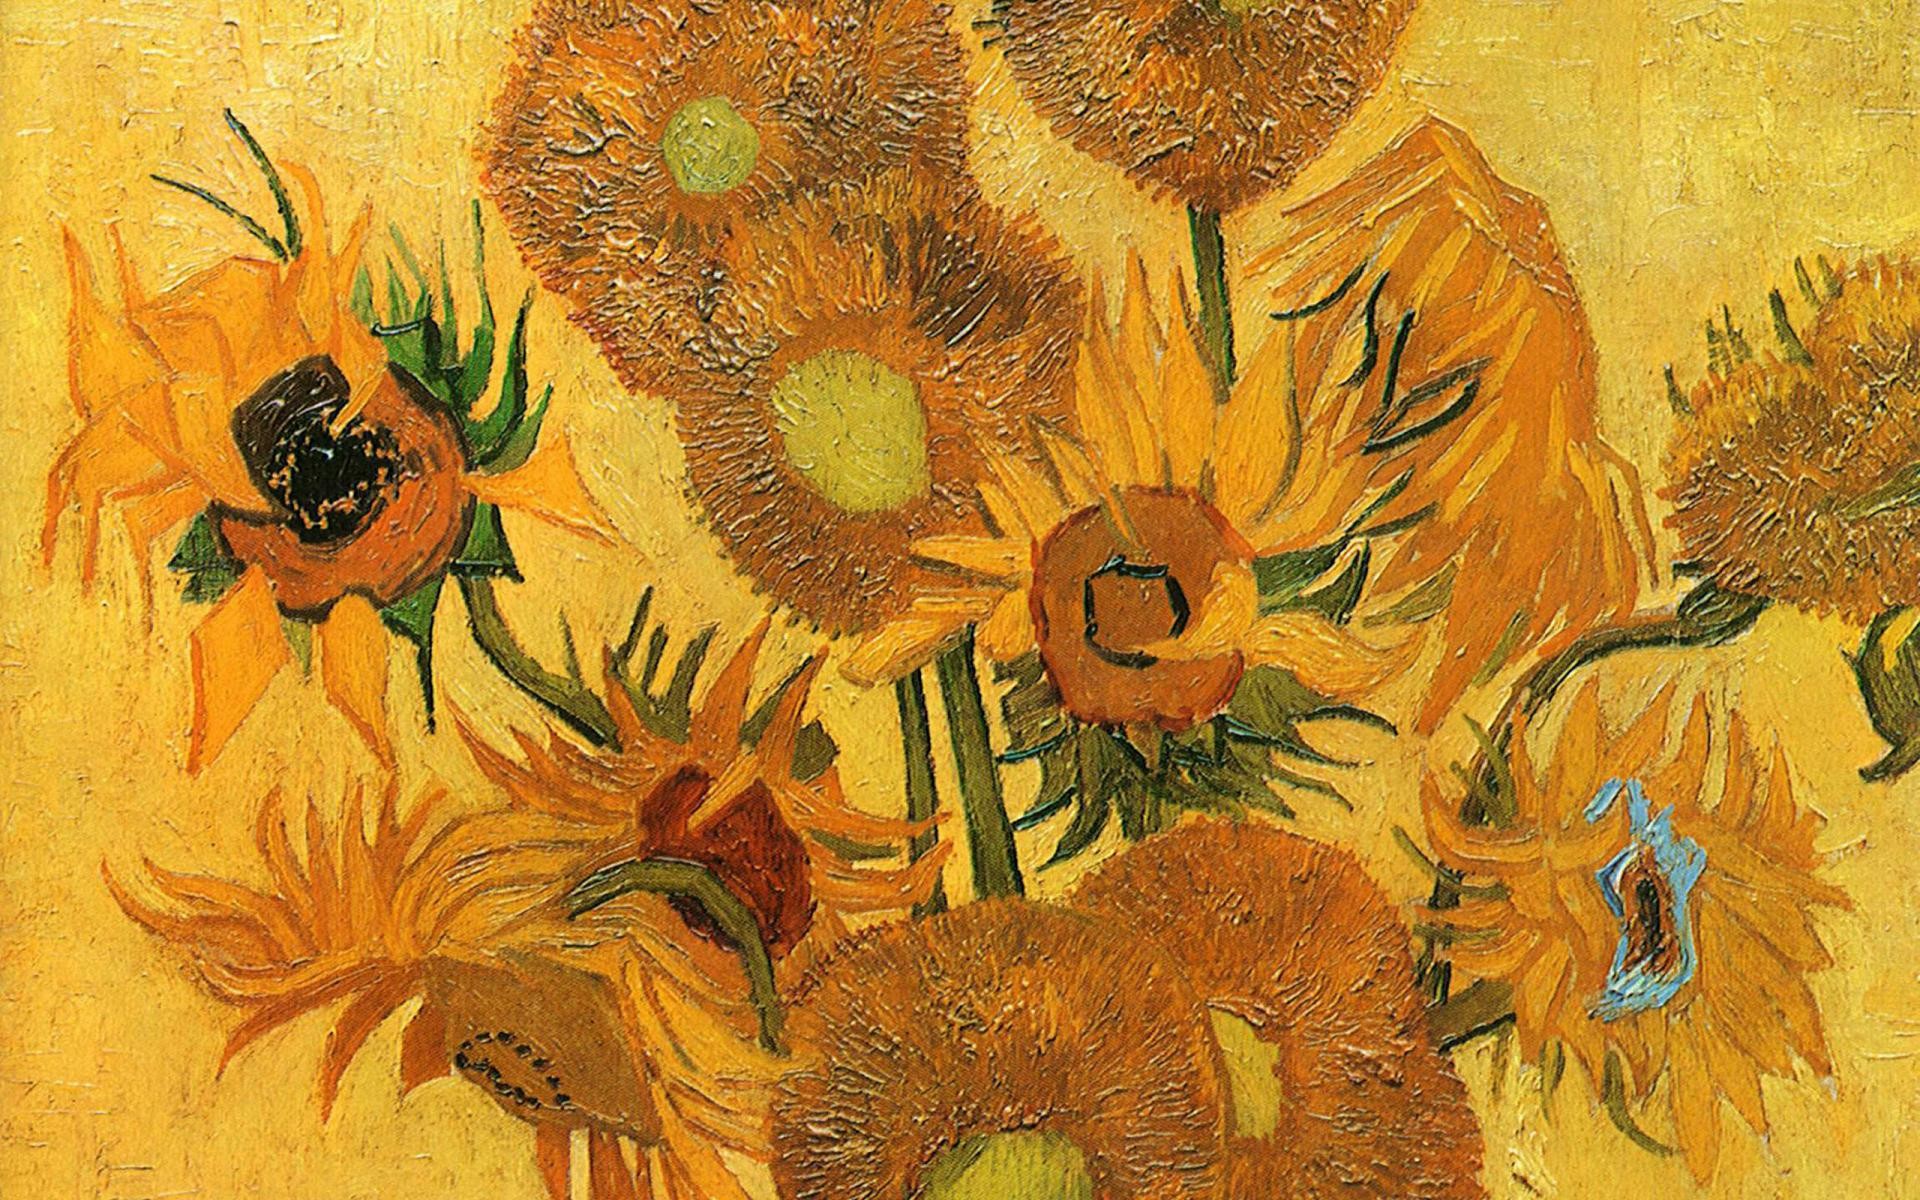 1920x1200 Drawn, Paintings, Famous, Painting, Of, Vincent, Van, Gogh, Life, Vase,  With, Fifteen, Sunflowers, Wide, Hd, Wallpaper, Hd Images, Widescreen, ...